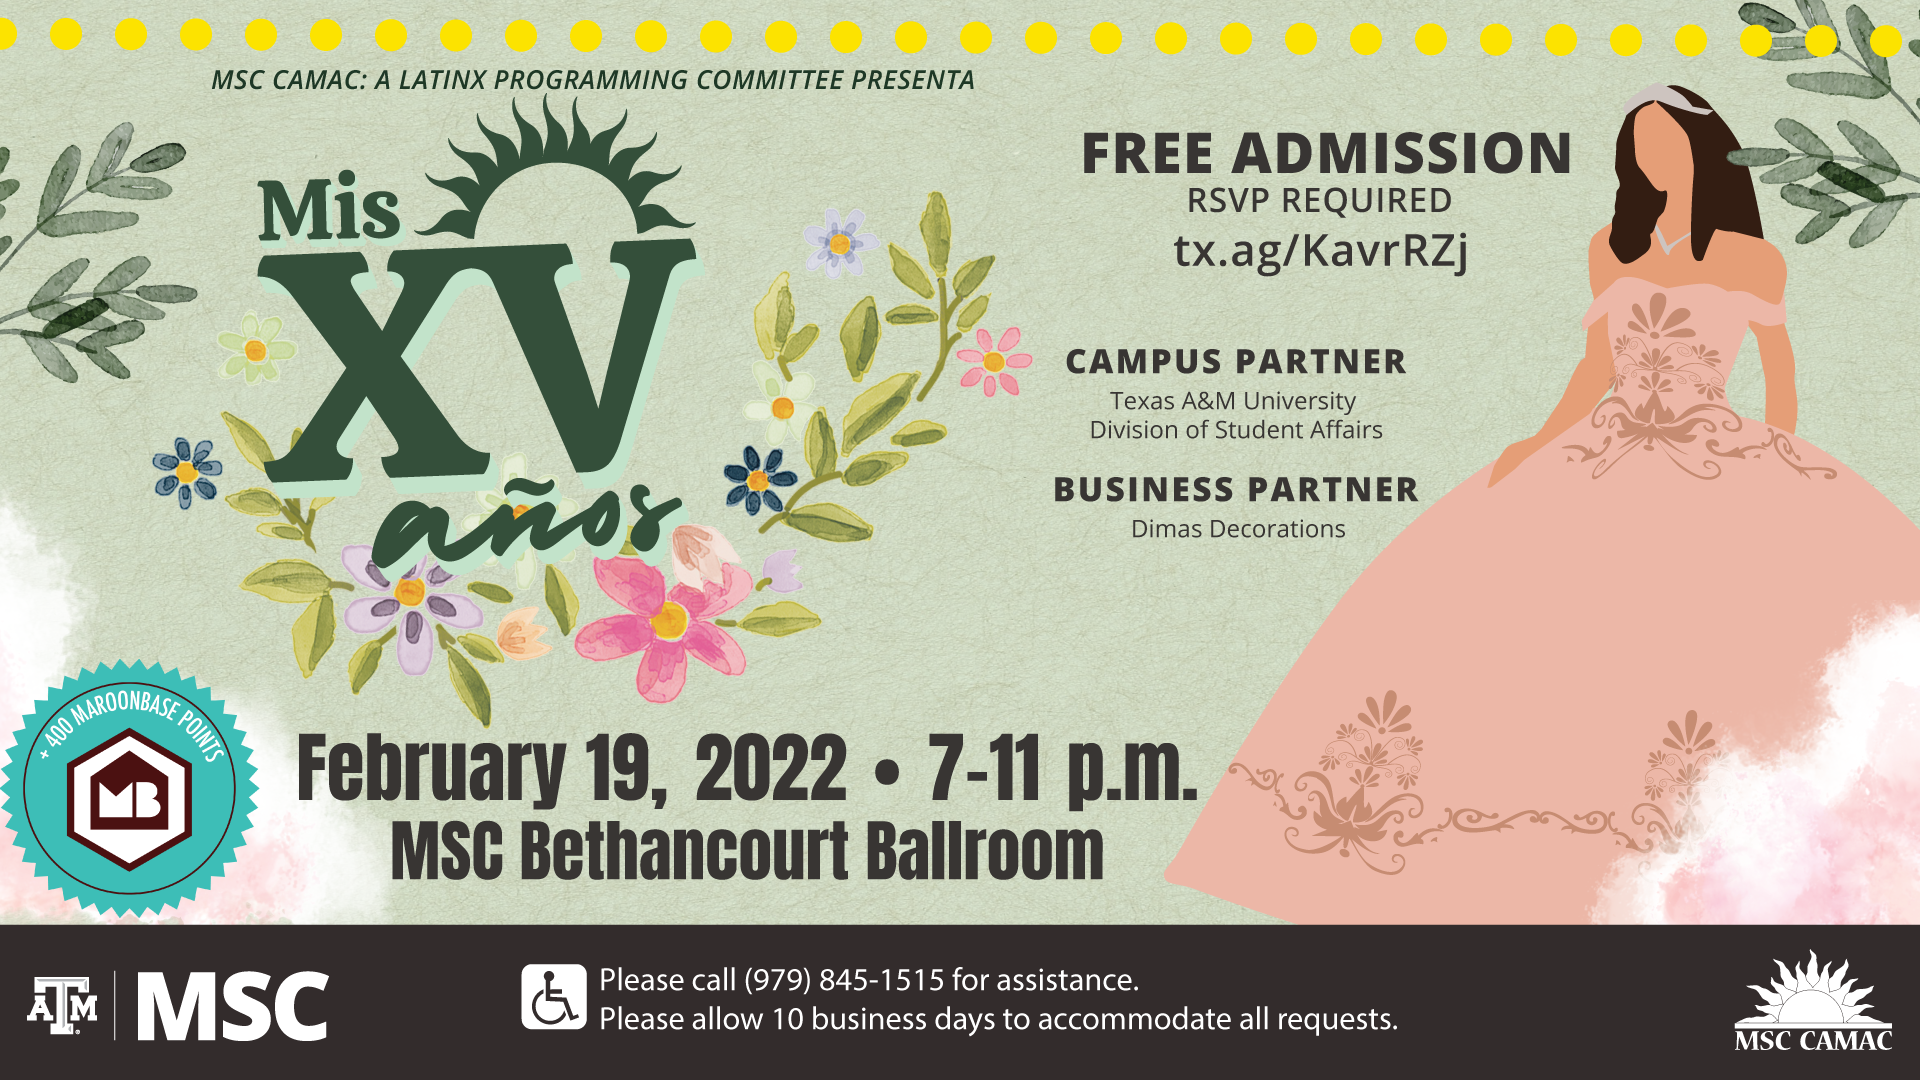 MSC CAMAC: A Lating Programming Committee Presenta: Mis Quince Años. February 19, 2022 from 7 to 11 p.m. at MSC Bethancourt Ballroom. Free Admission, RSVP Required: tx.ag/KavrRZj Campus Partner: Texas A&M University Division of Student Affairs. Business Partner: Dimas Decorations. Please call 979.845.1515 for assistance. Please allow 10 business days to accommodate all requests.